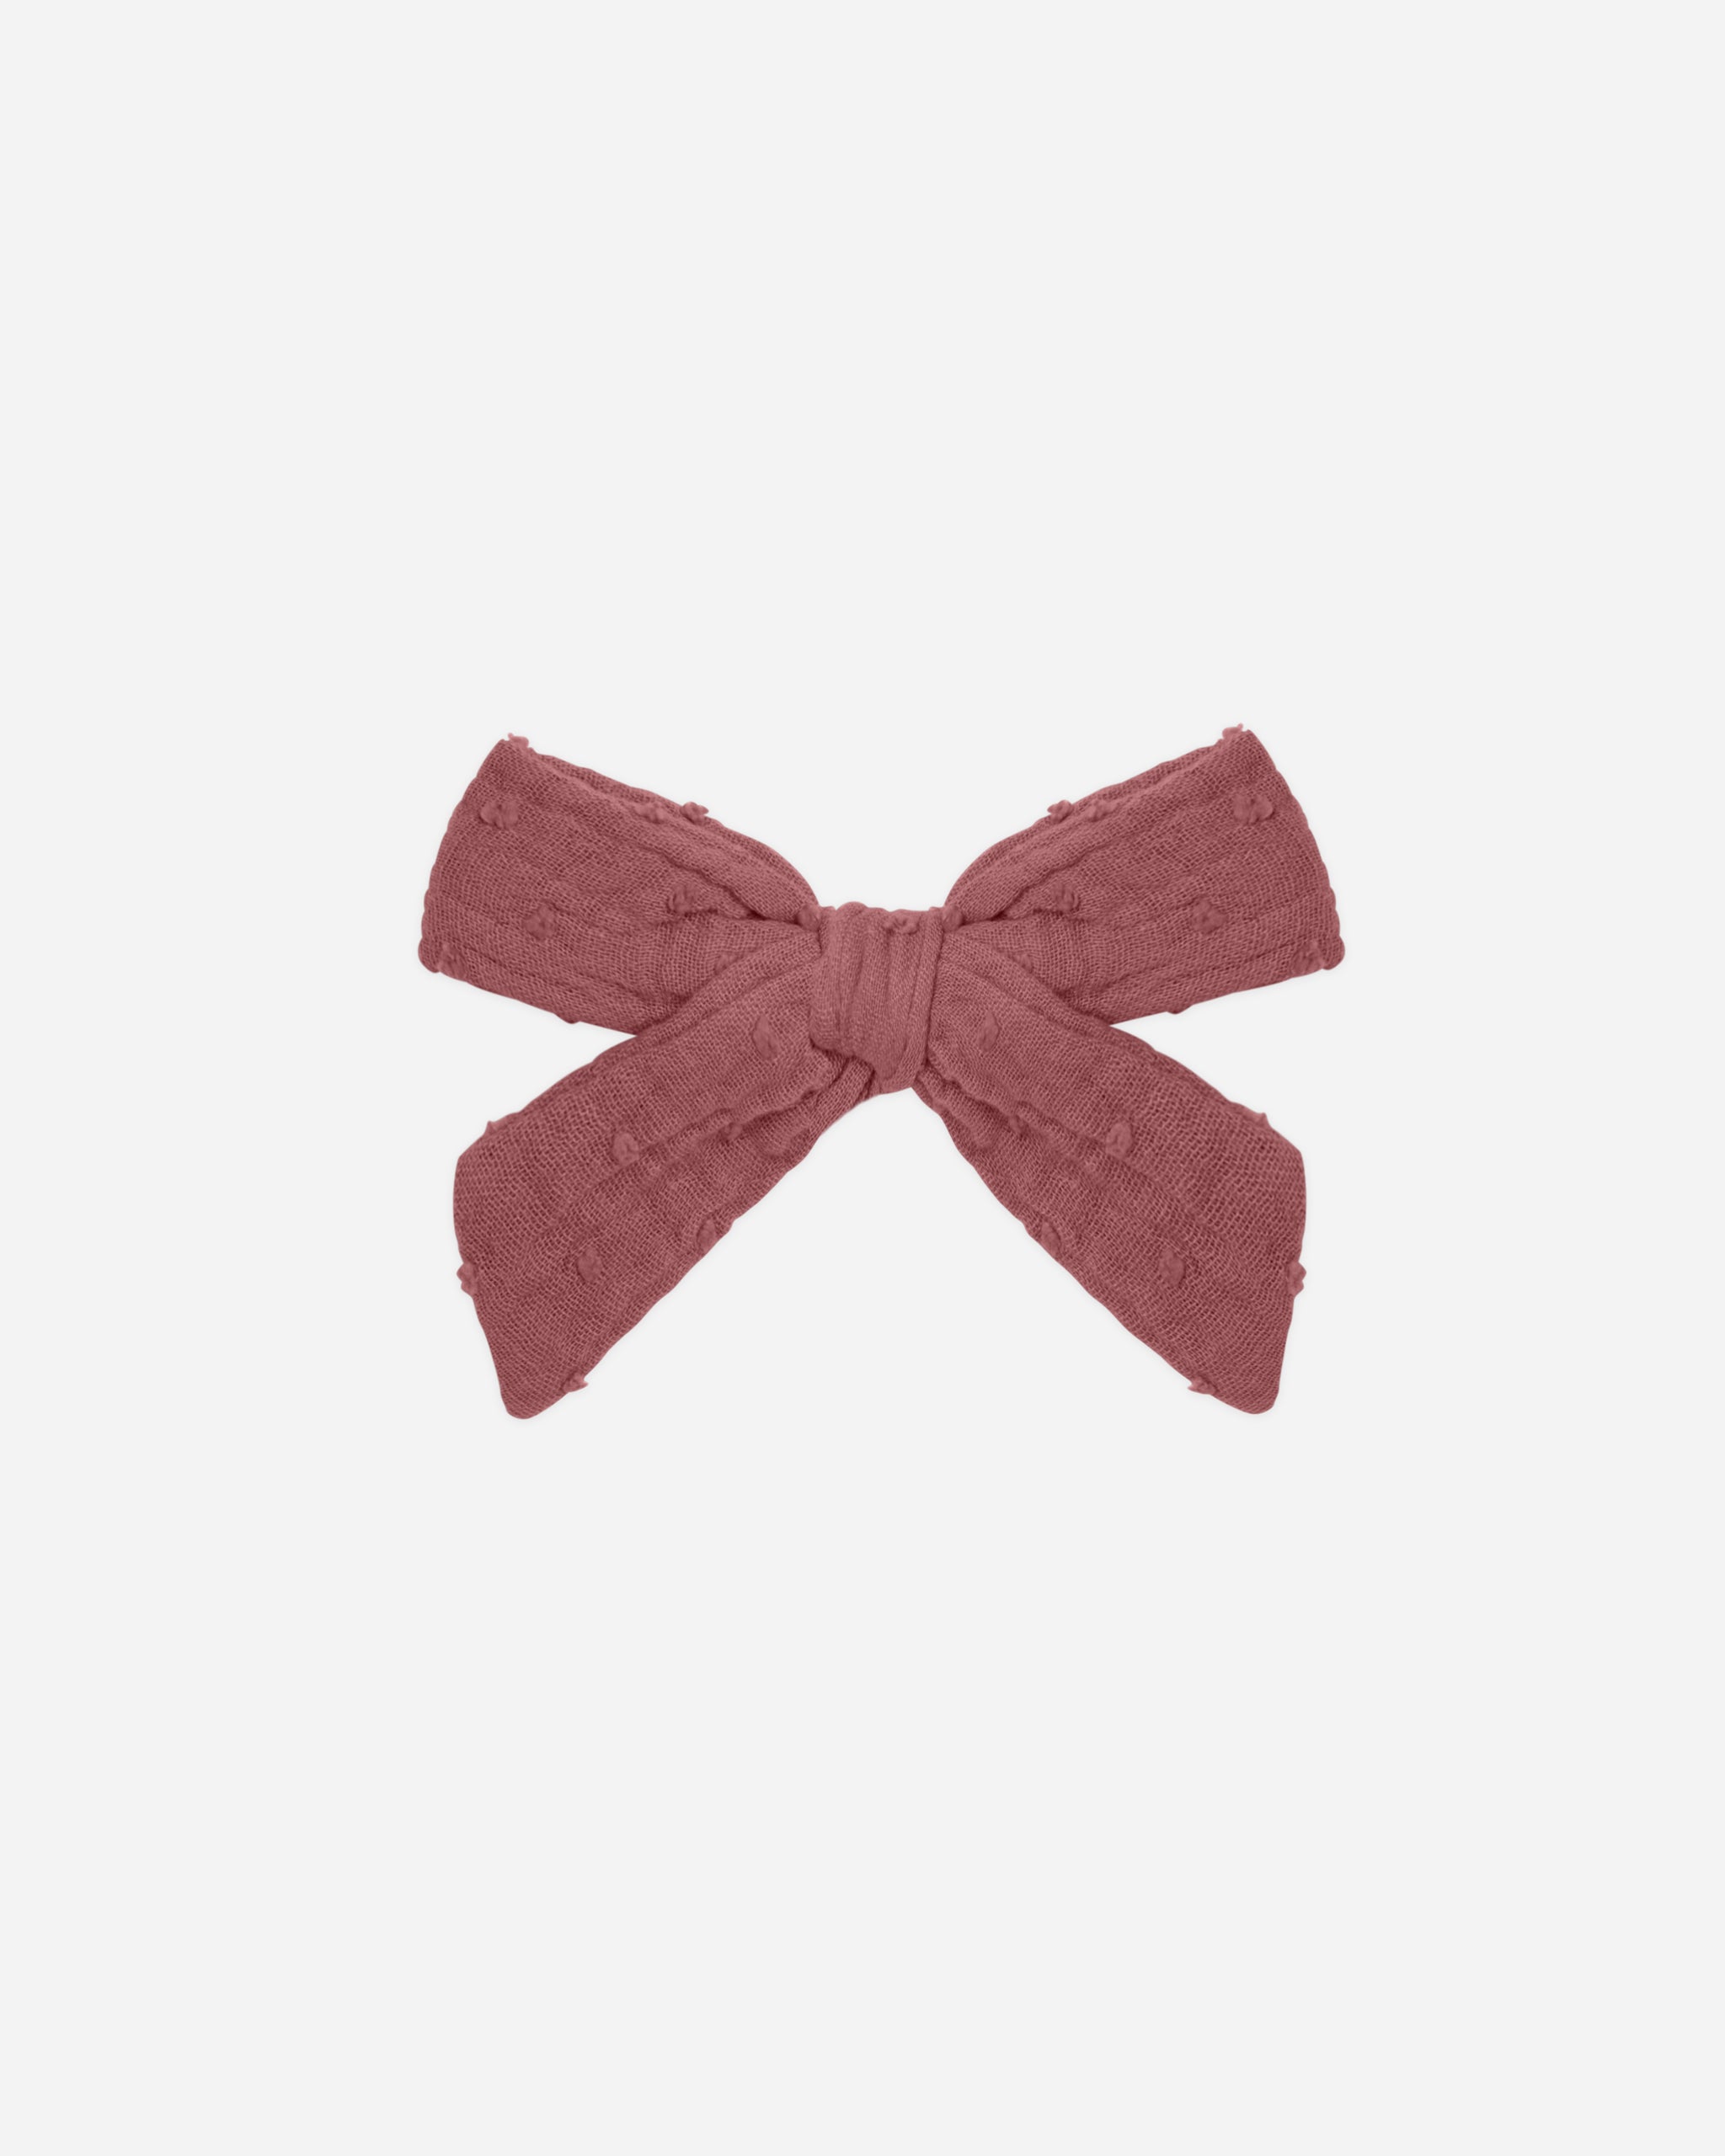 Girl Bow | Raspberry - Rylee + Cru | Kids Clothes | Trendy Baby Clothes | Modern Infant Outfits |